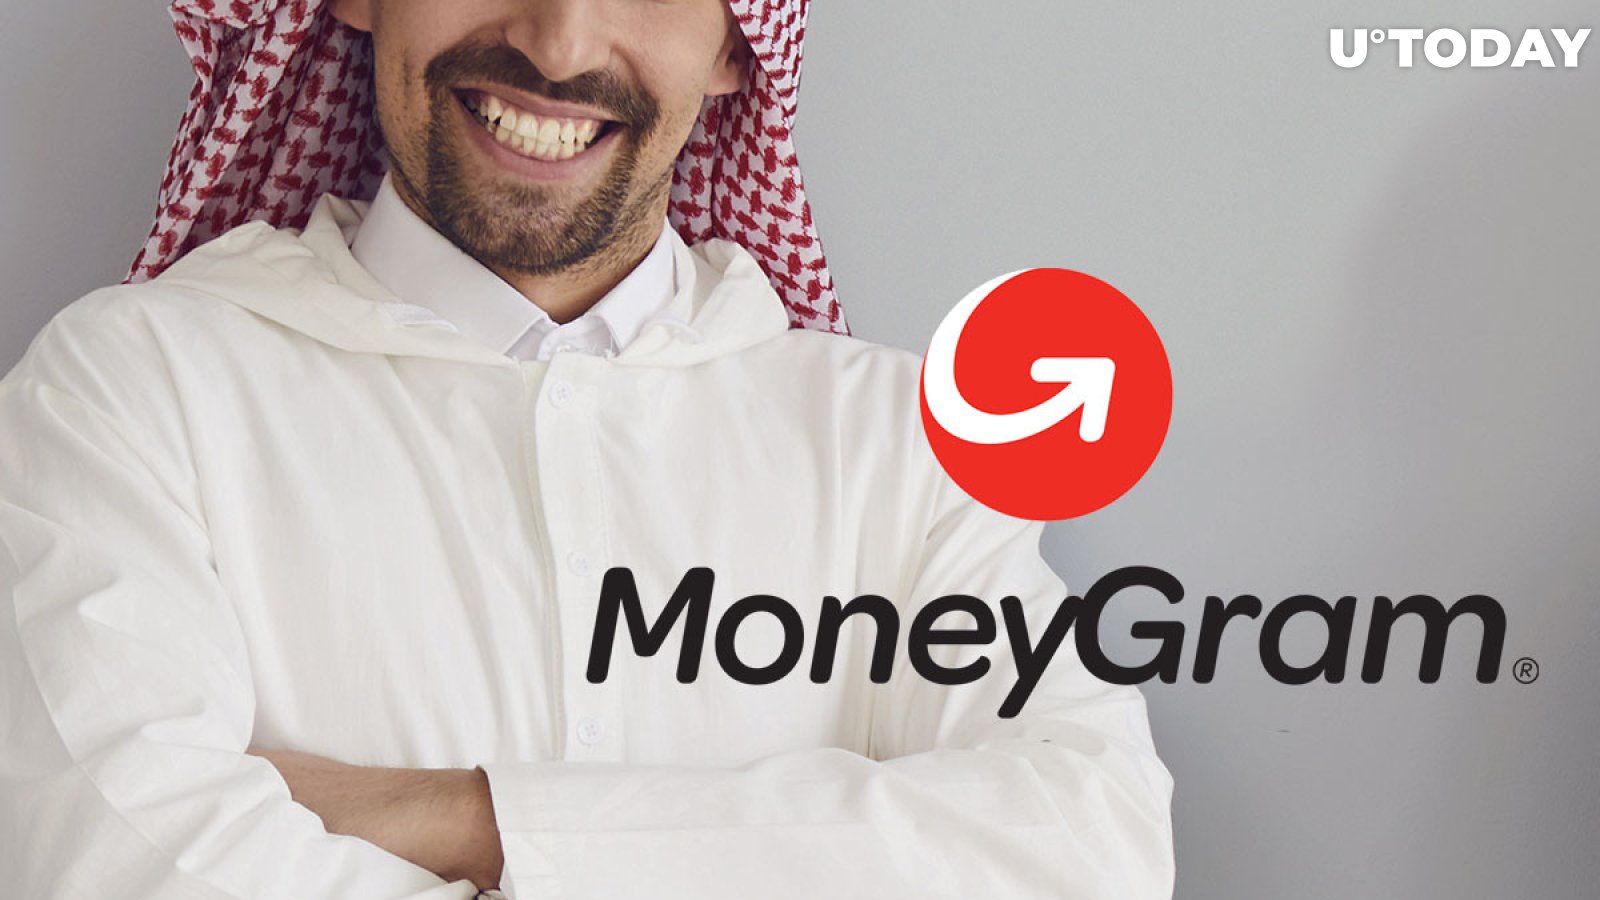 Ripple's Partner MoneyGram Joins Forces with World's Largest Islamic Bank